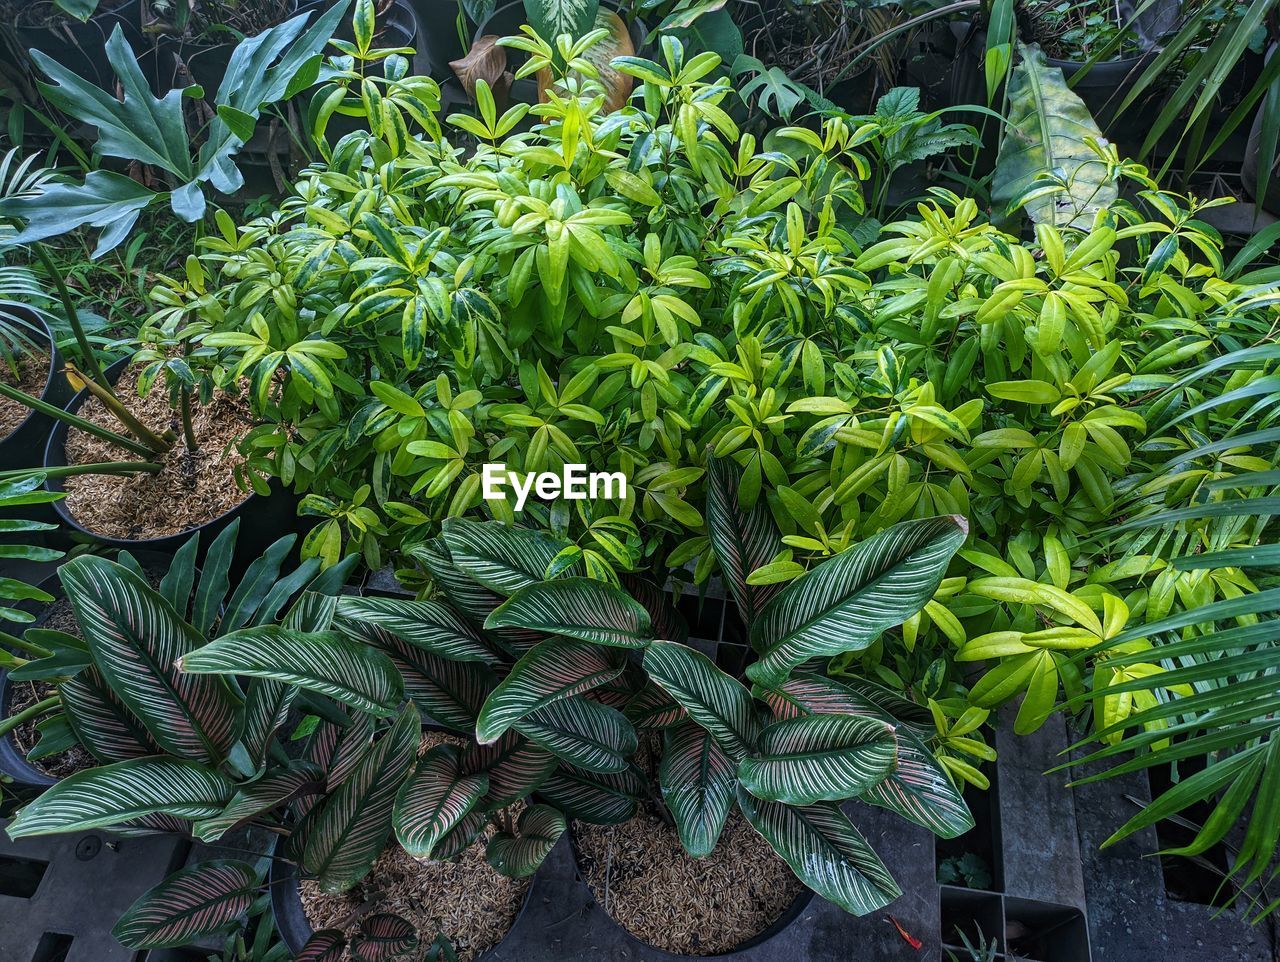 plant, growth, green, leaf, plant part, nature, flower, beauty in nature, houseplant, food and drink, food, herb, no people, cannabis plant, healthcare and medicine, freshness, day, agriculture, rainforest, outdoors, cannabis, garden, medicine, high angle view, botany, jungle, land, tree, shrub